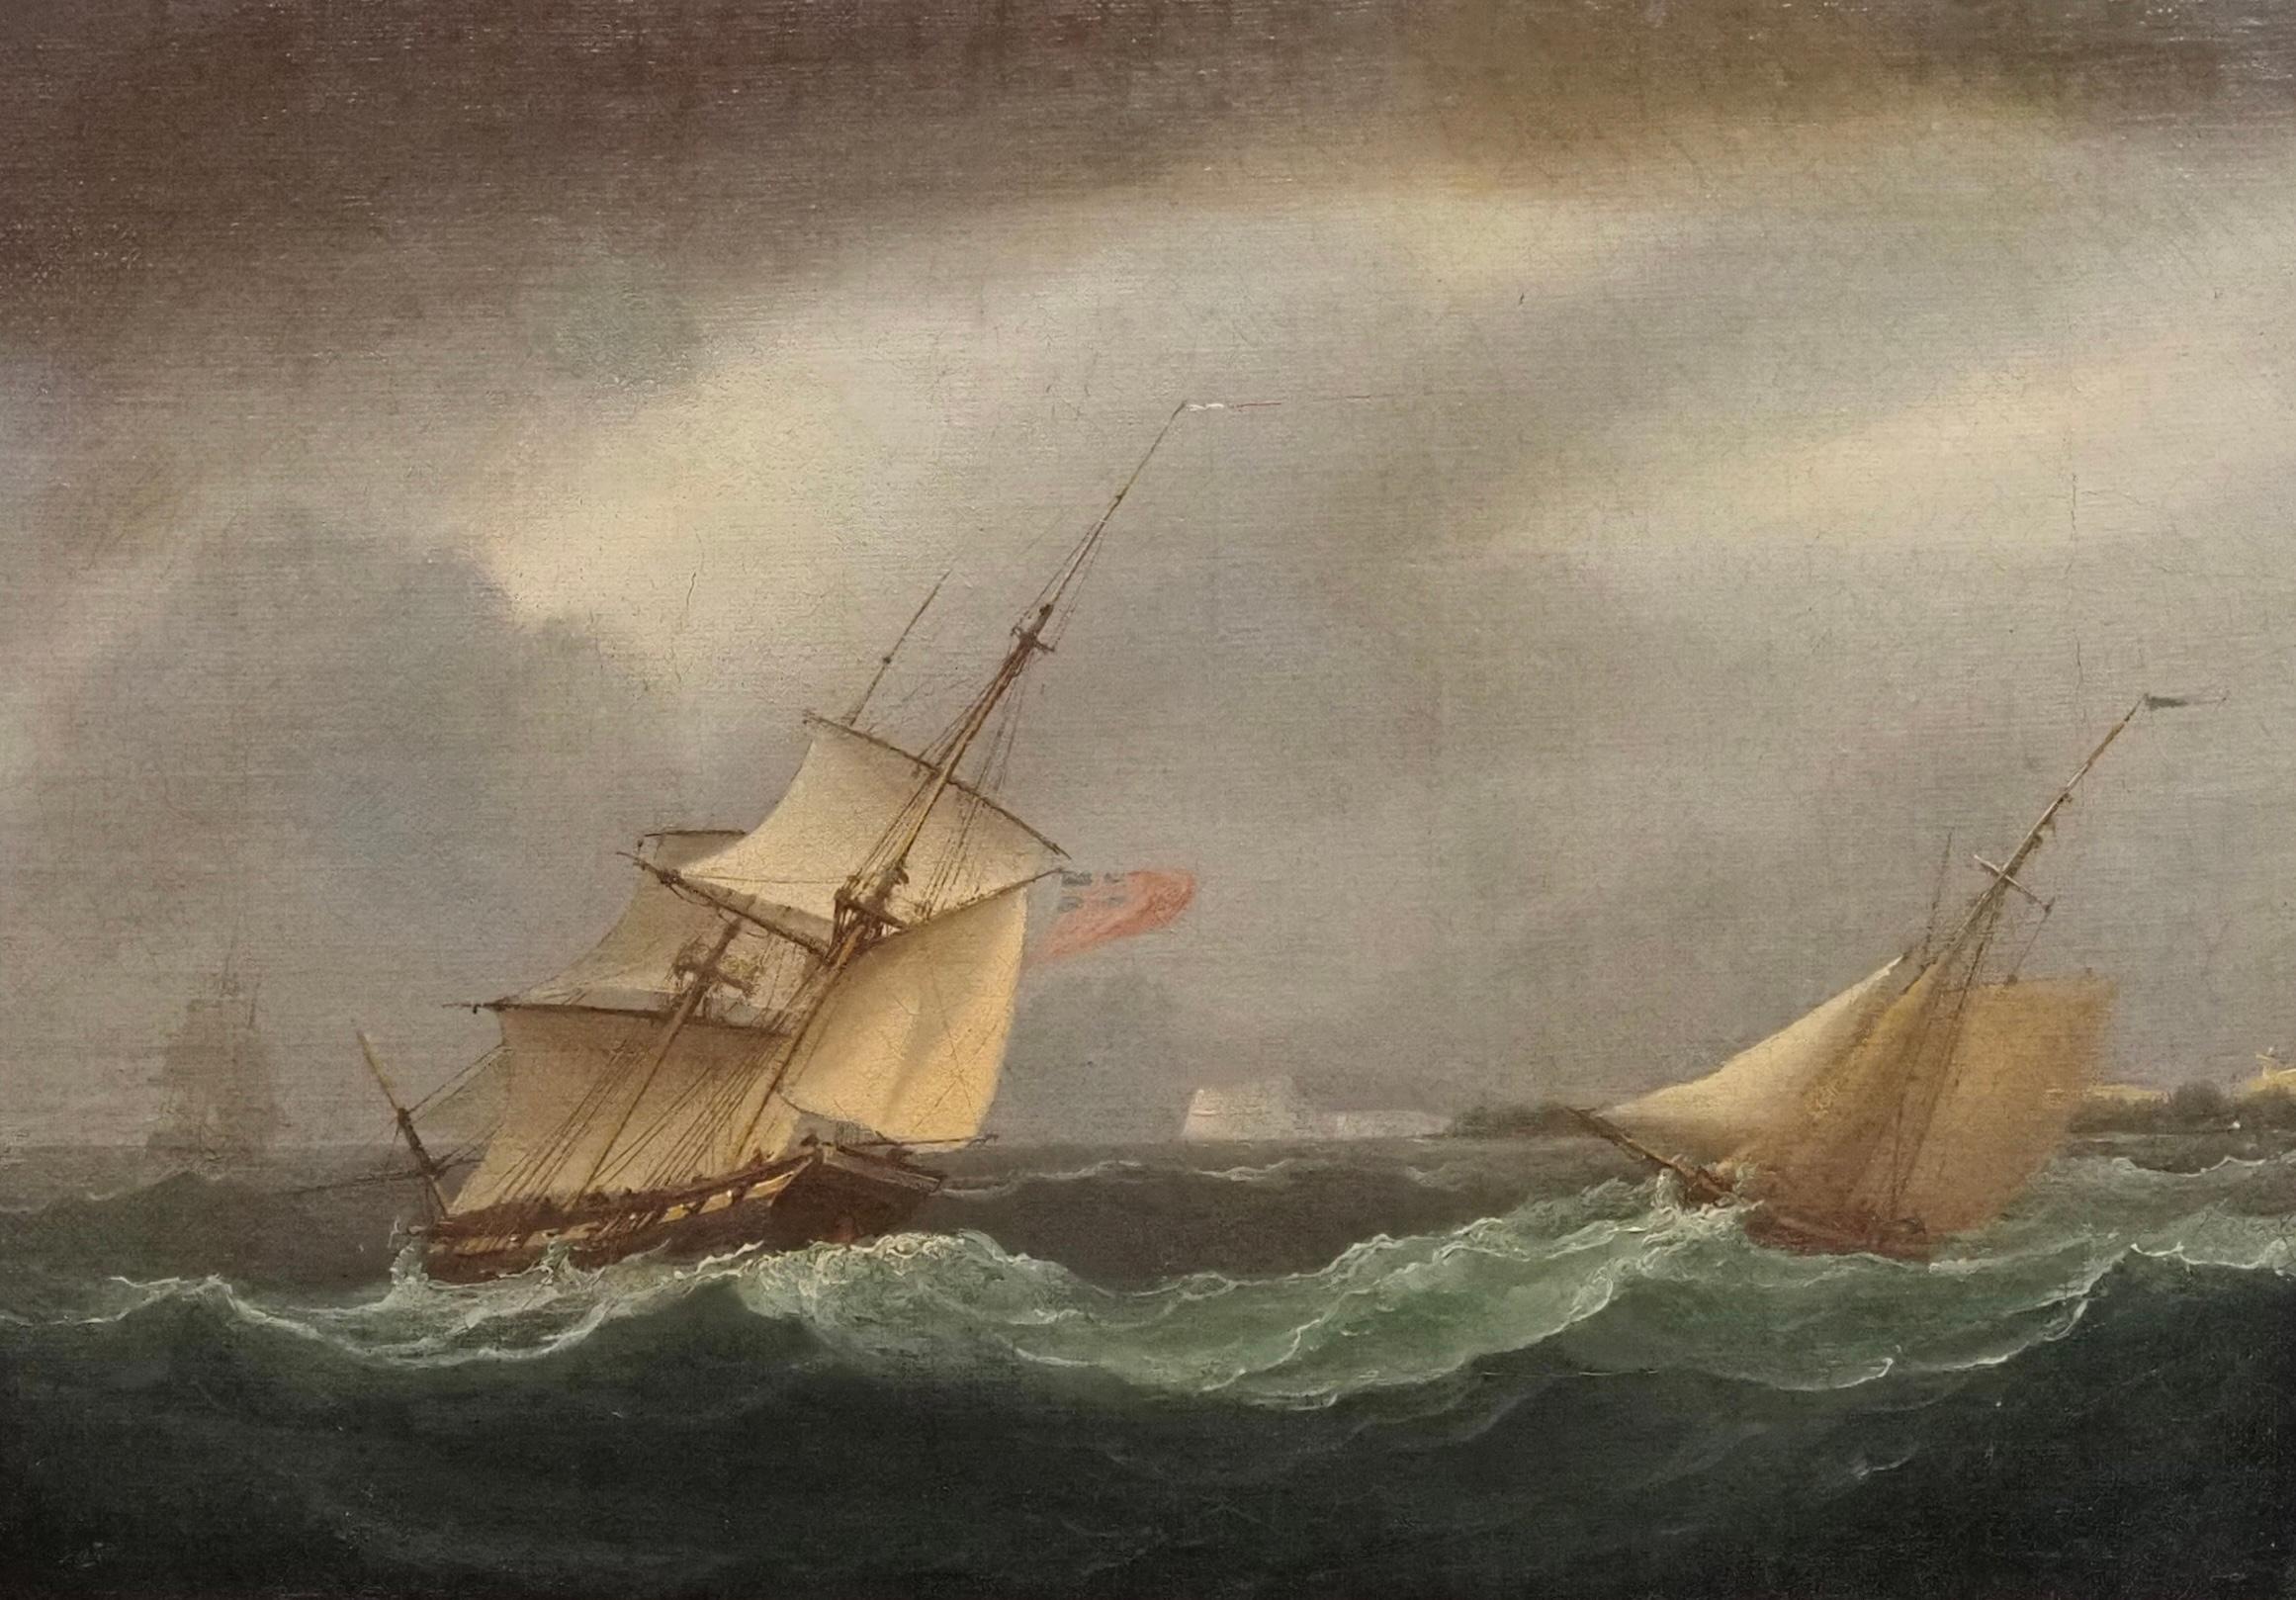 Shipping in choppy waters of a coastline - Painting by Thomas Buttersworth